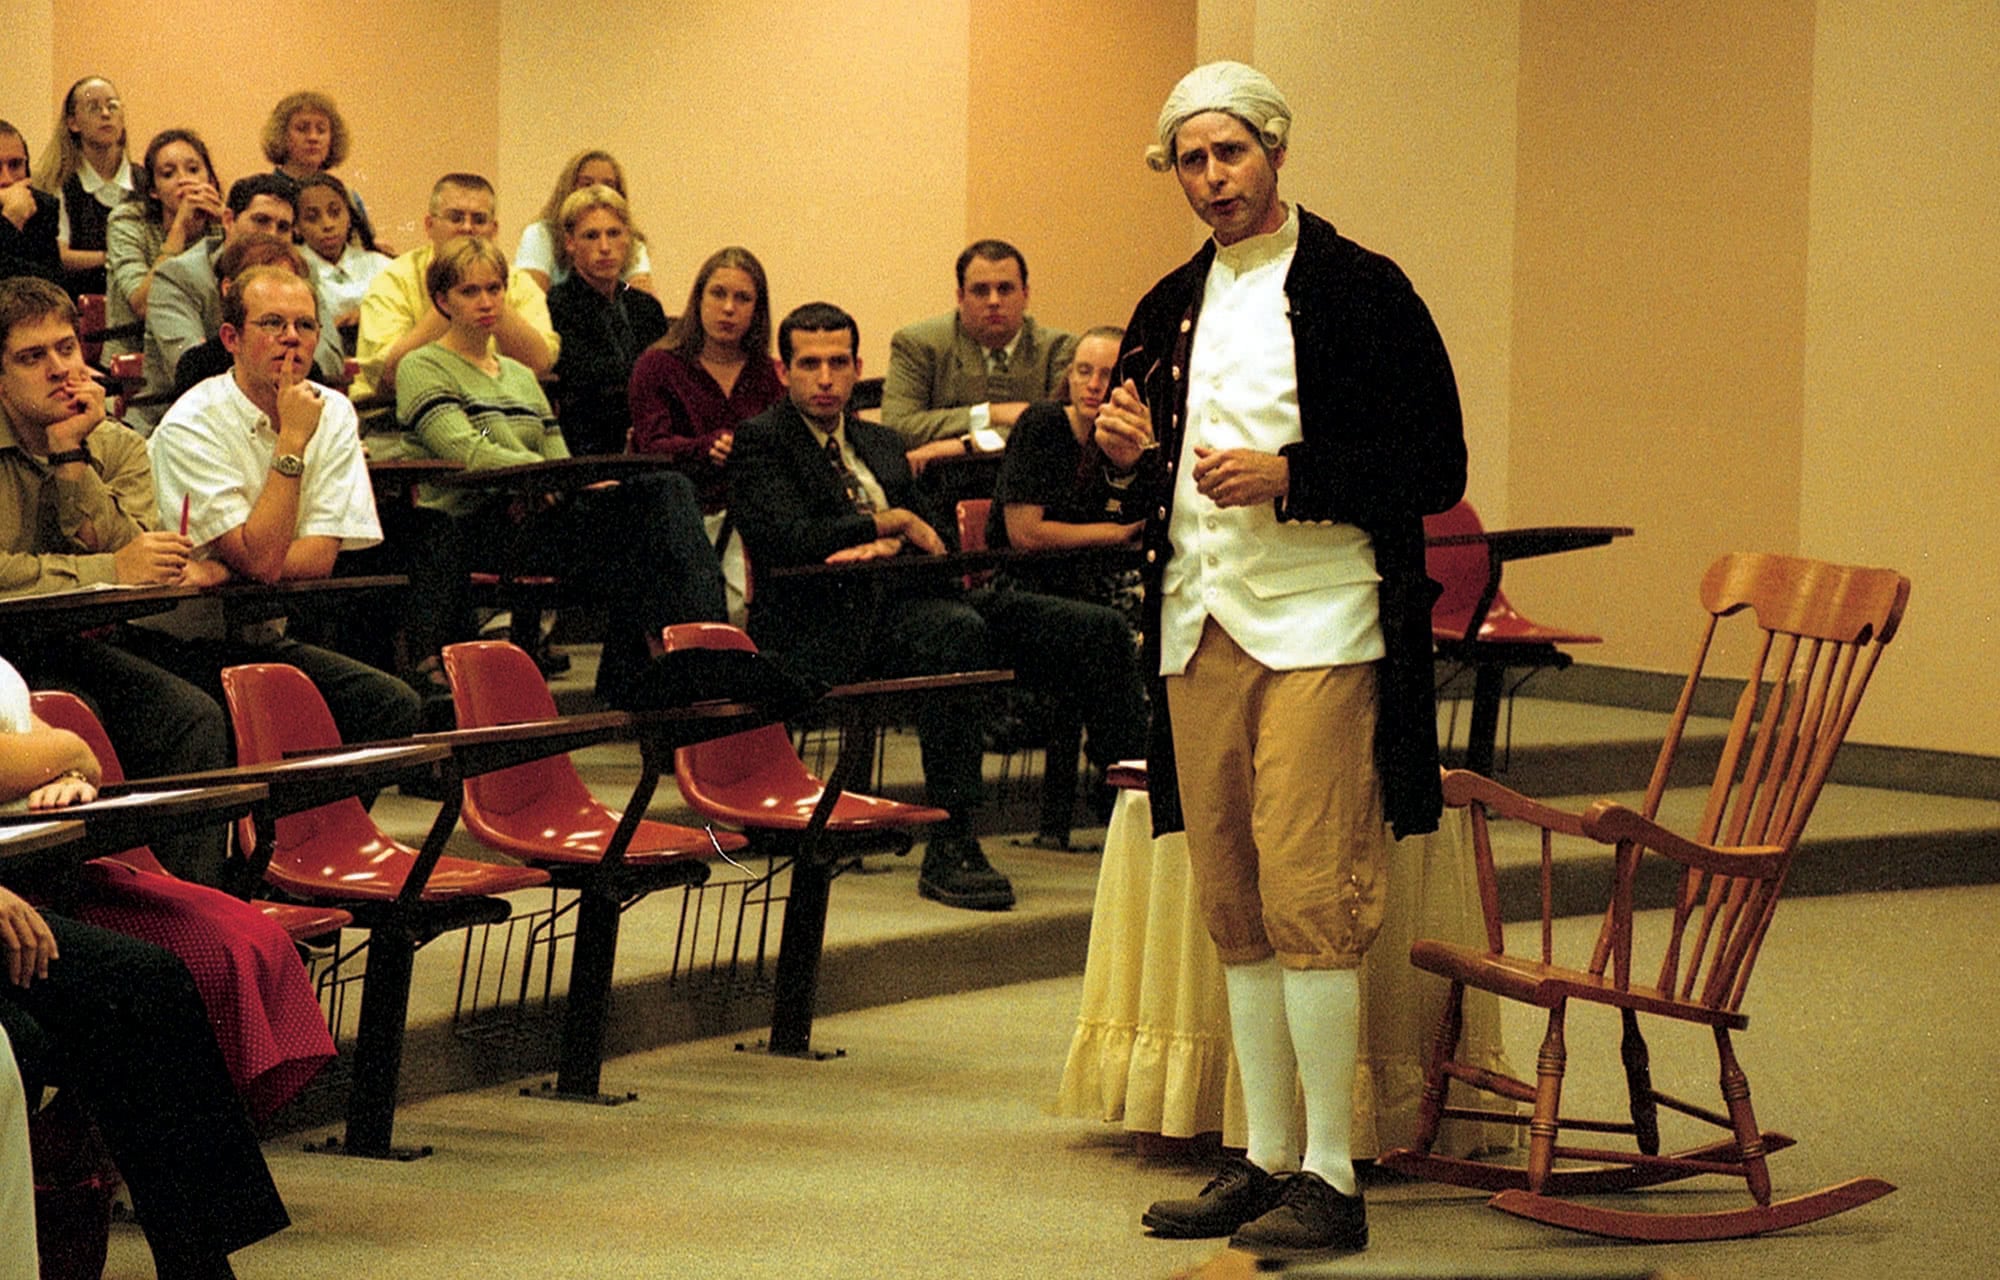 John Reese dressed as a founding father teaches a seminar in the Lyceum